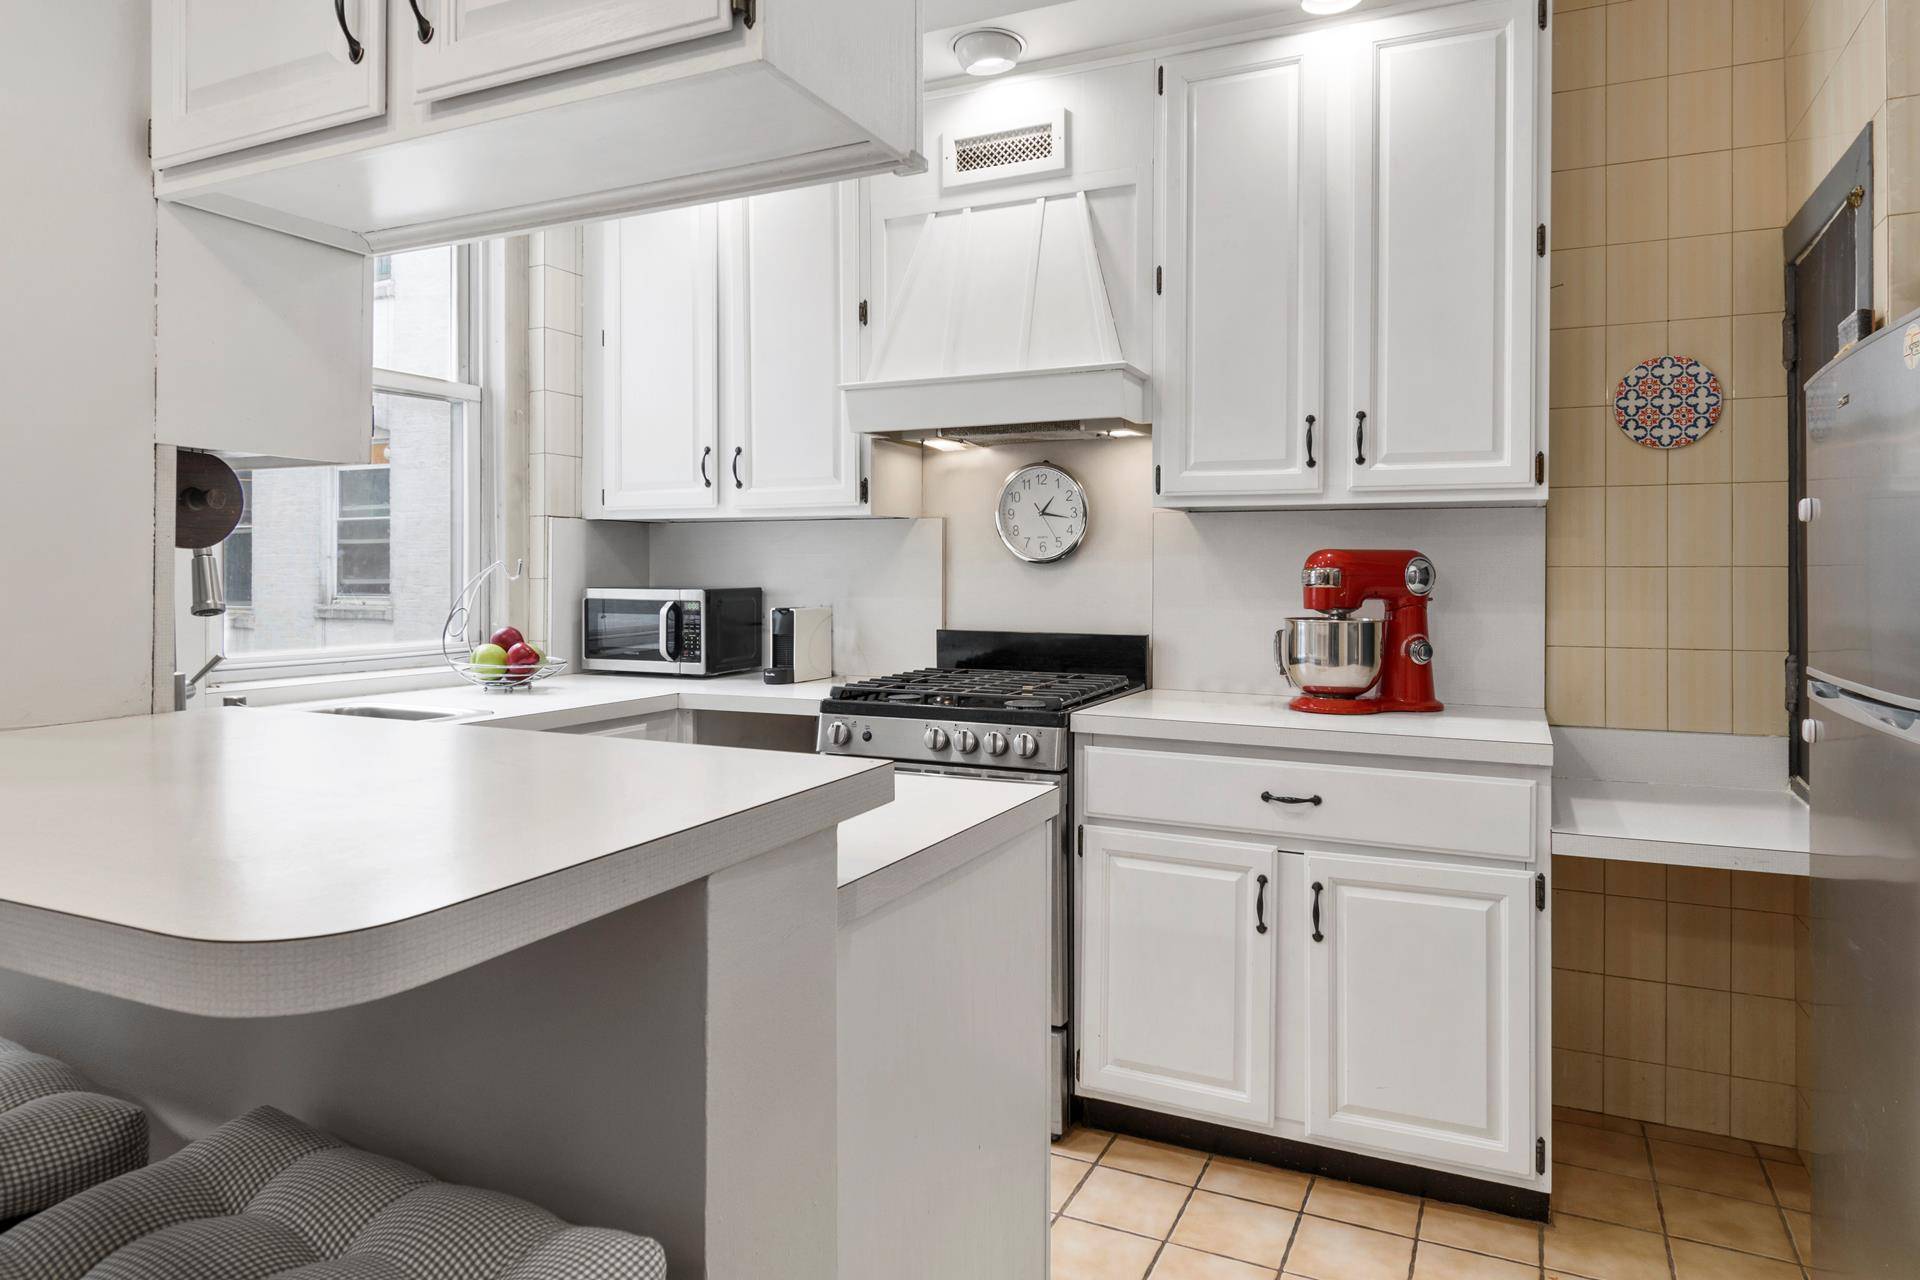 OPEN HOUSE BY APPOINTMENT ONLY OWNER OCCUPIED PLEASE CALL FOR APPOINTMENT Lovely PRE WAR 2 Bedroom, 1 Bath conveniently located in the heart of Woodside.